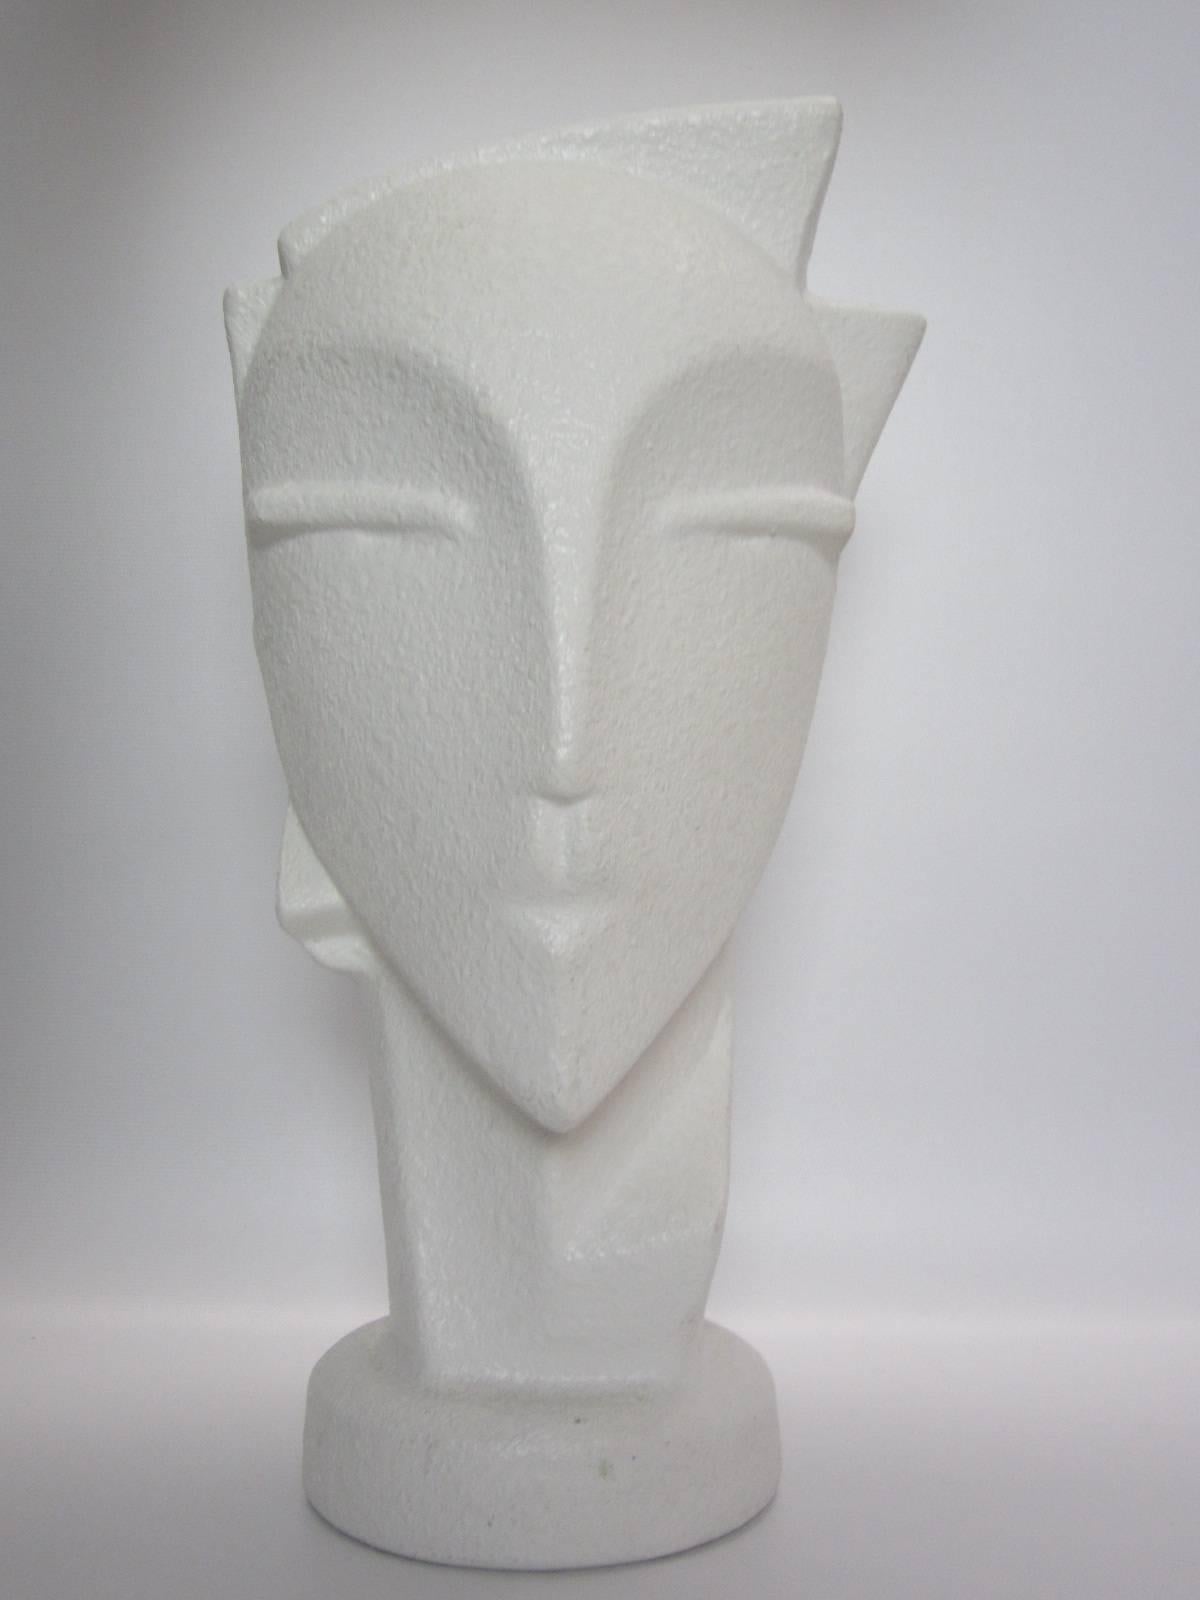 Fabulous vase in textured white ceramic in abstract androgynous form. Inspired by Hagenauer.